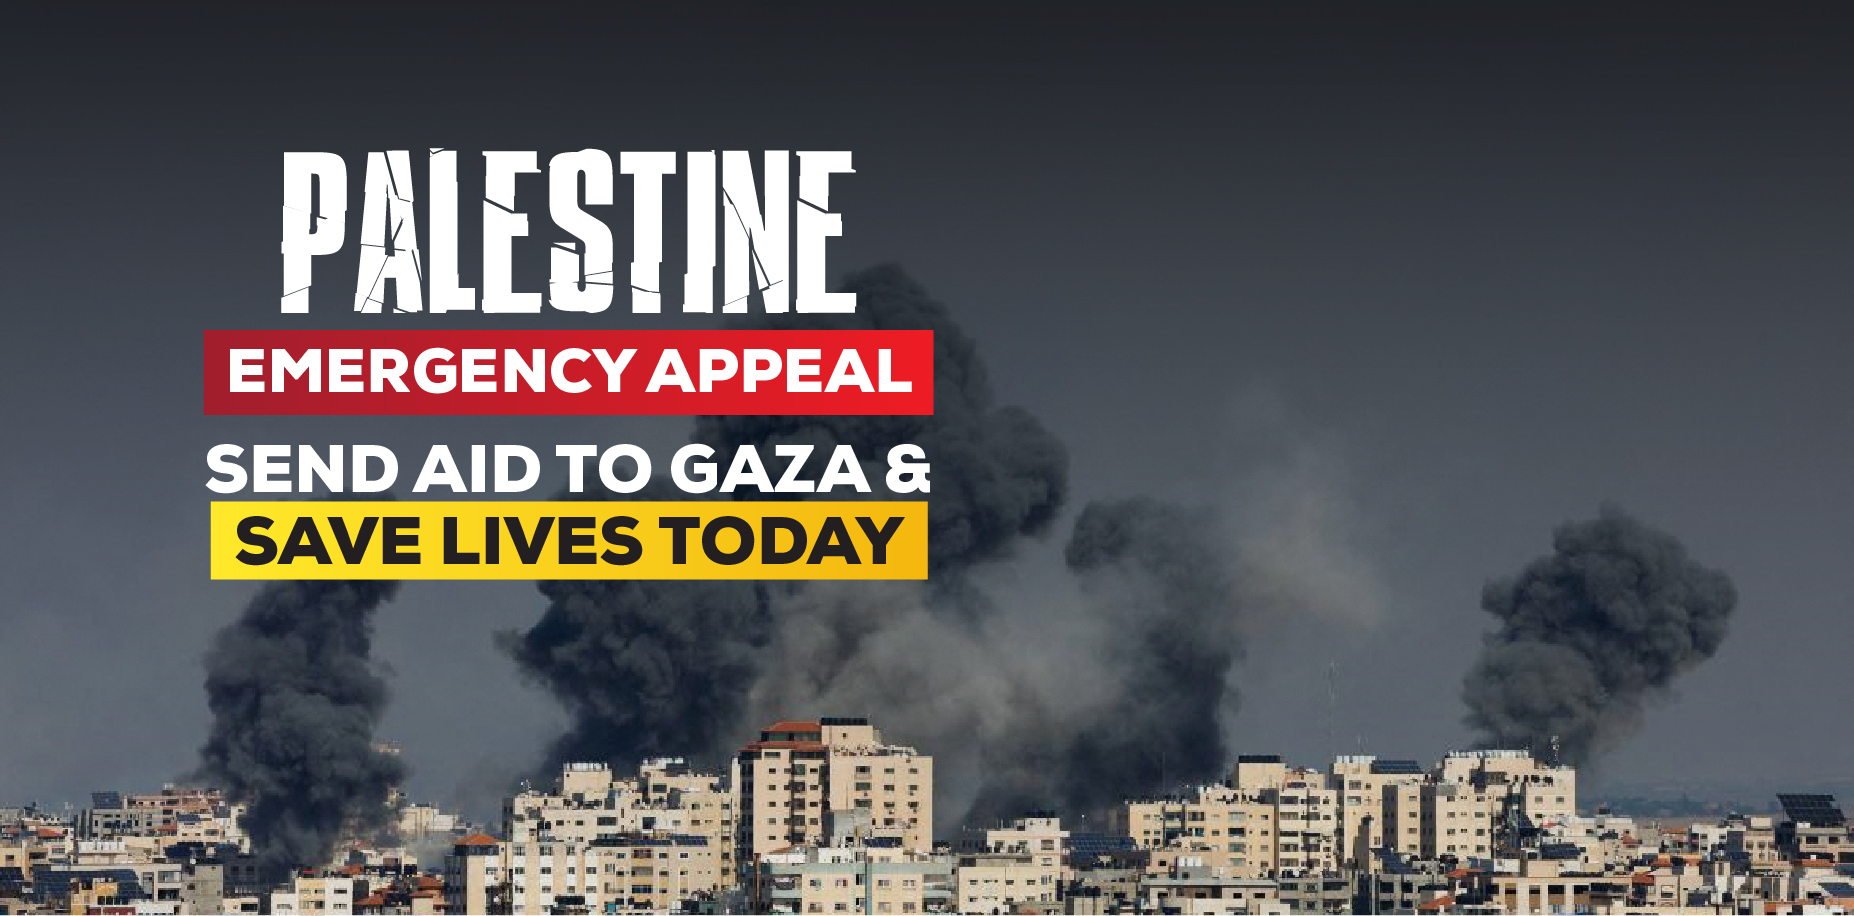 PALESTIE EMERGENCY APPEAL SEND AID TO GAZA & SAVE LIVES TODAY